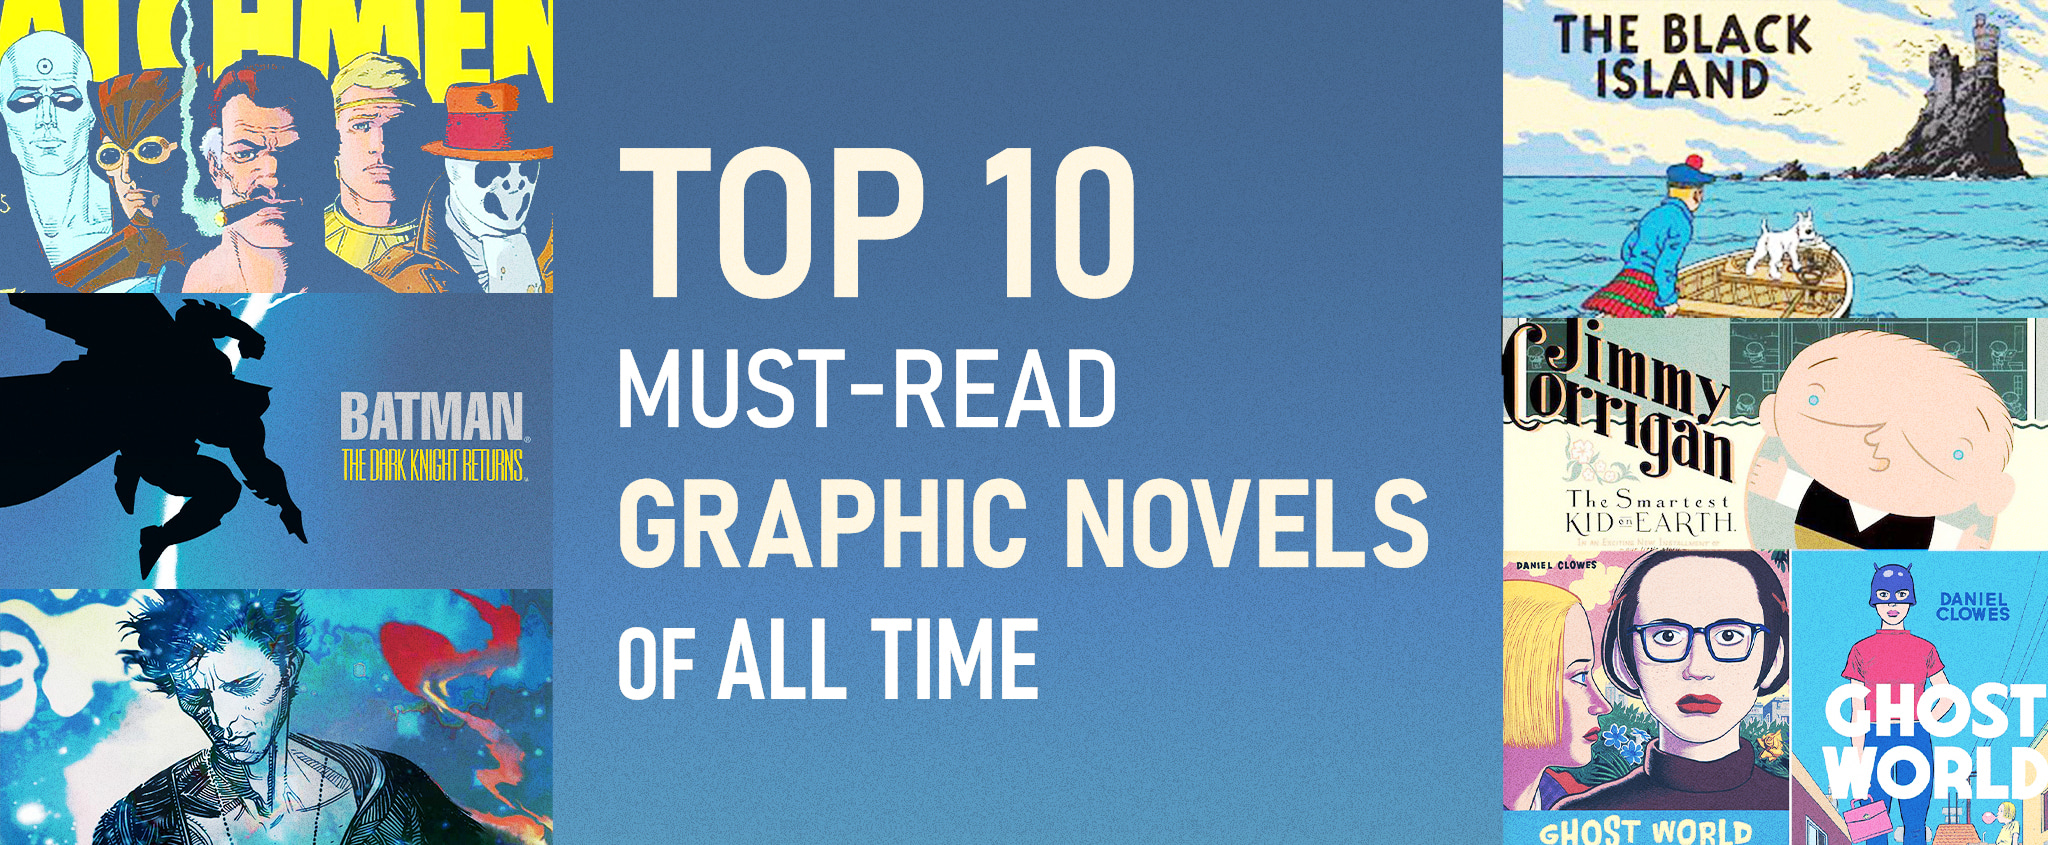 Top 10 Must-Read Graphic Novels of All Time